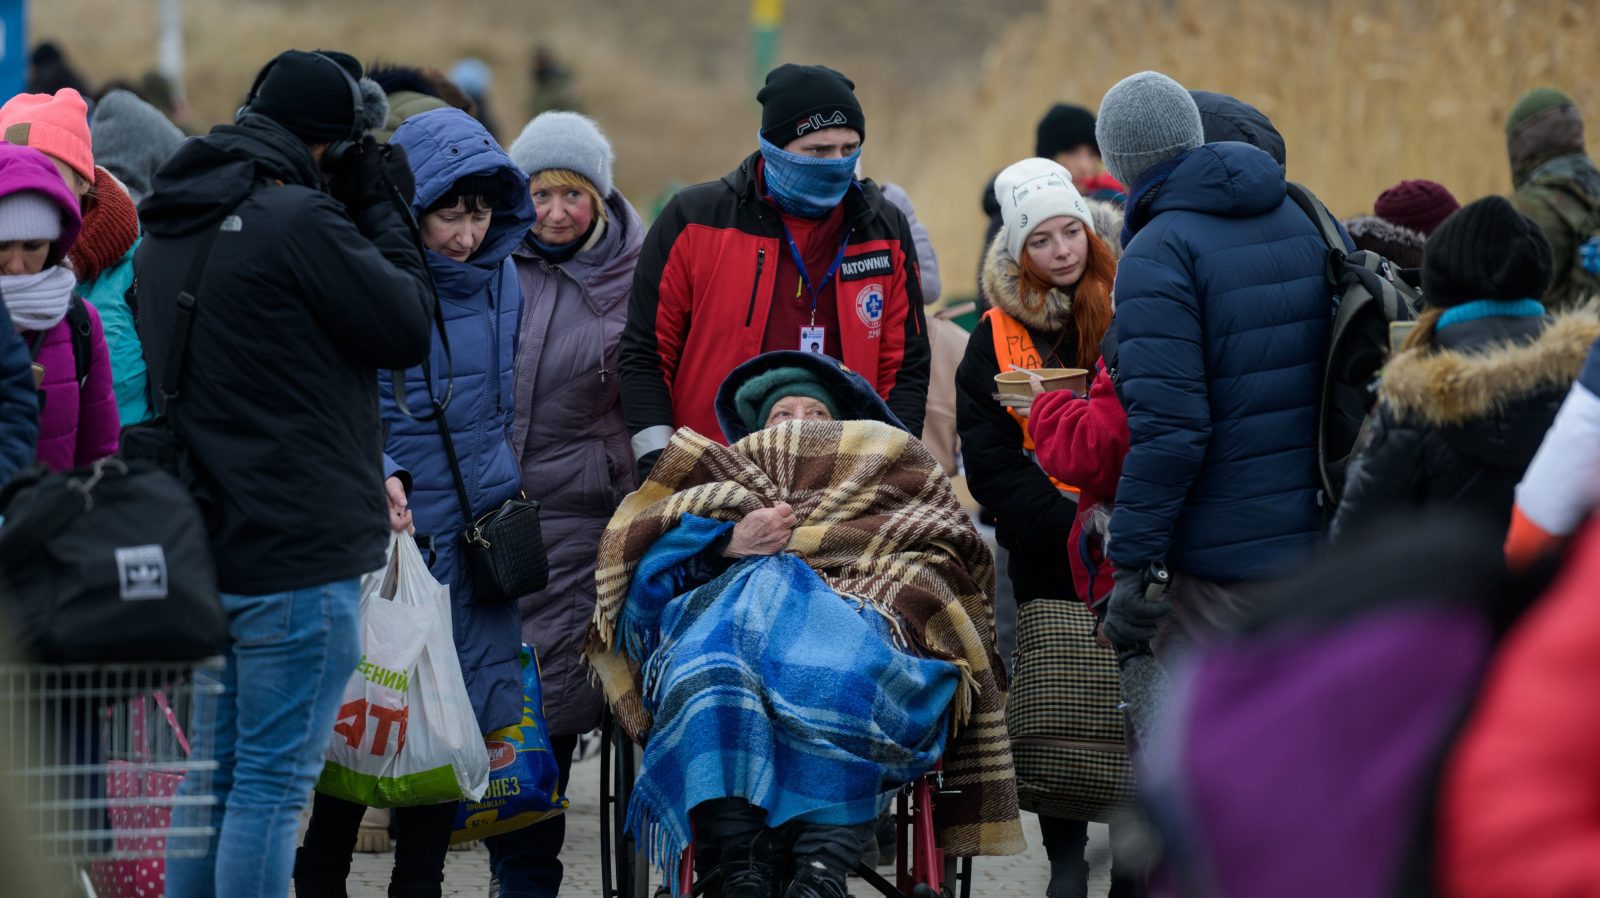 Website crashes as 89,000 people sign-up to open their homes to Ukraine refugees in UK, The Manc